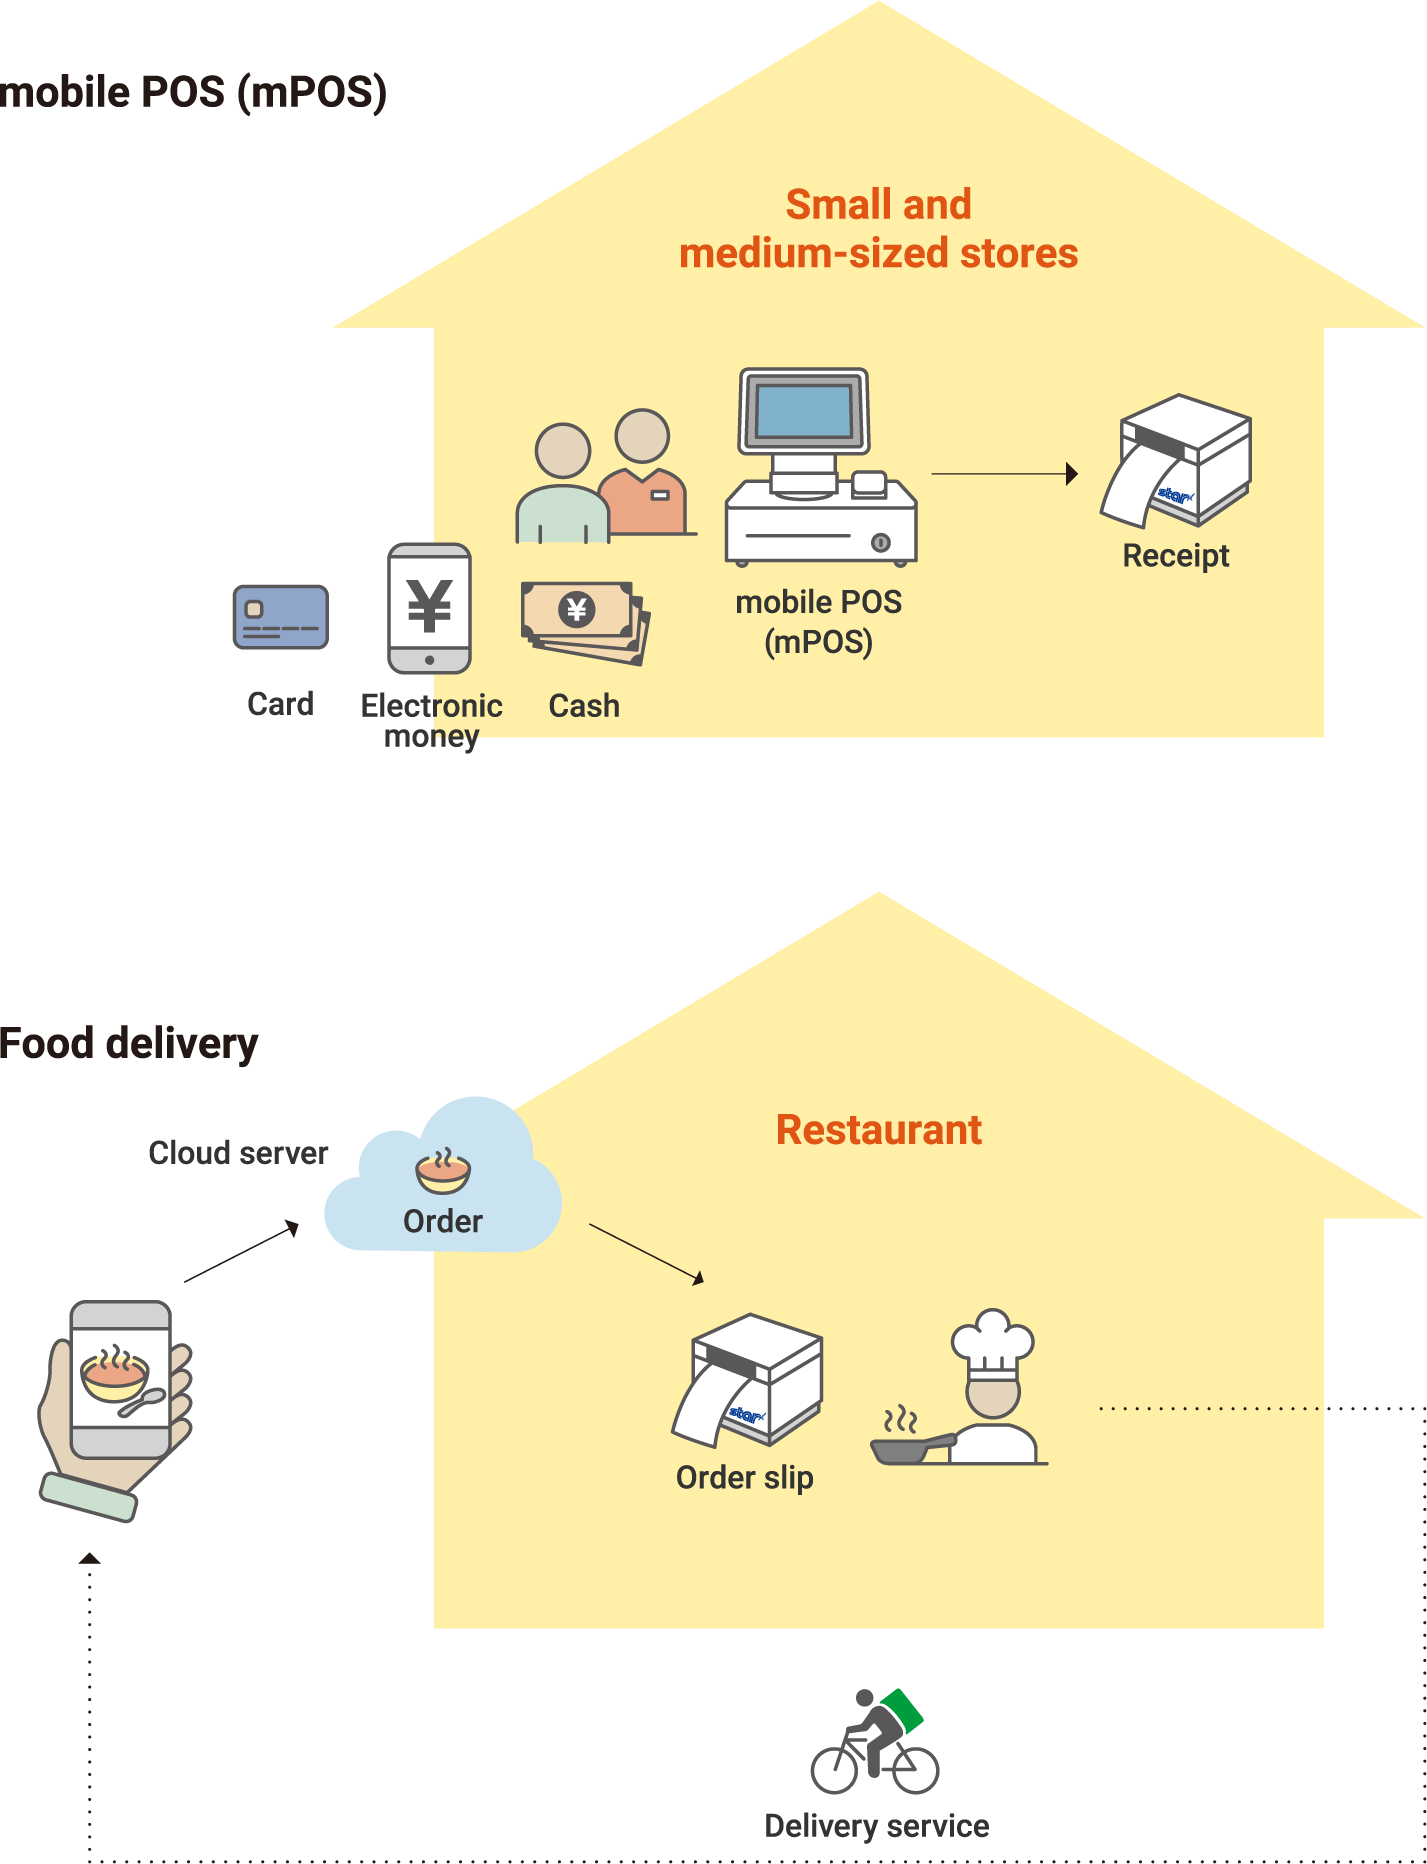 mobile POS (mPOS) Food delivery